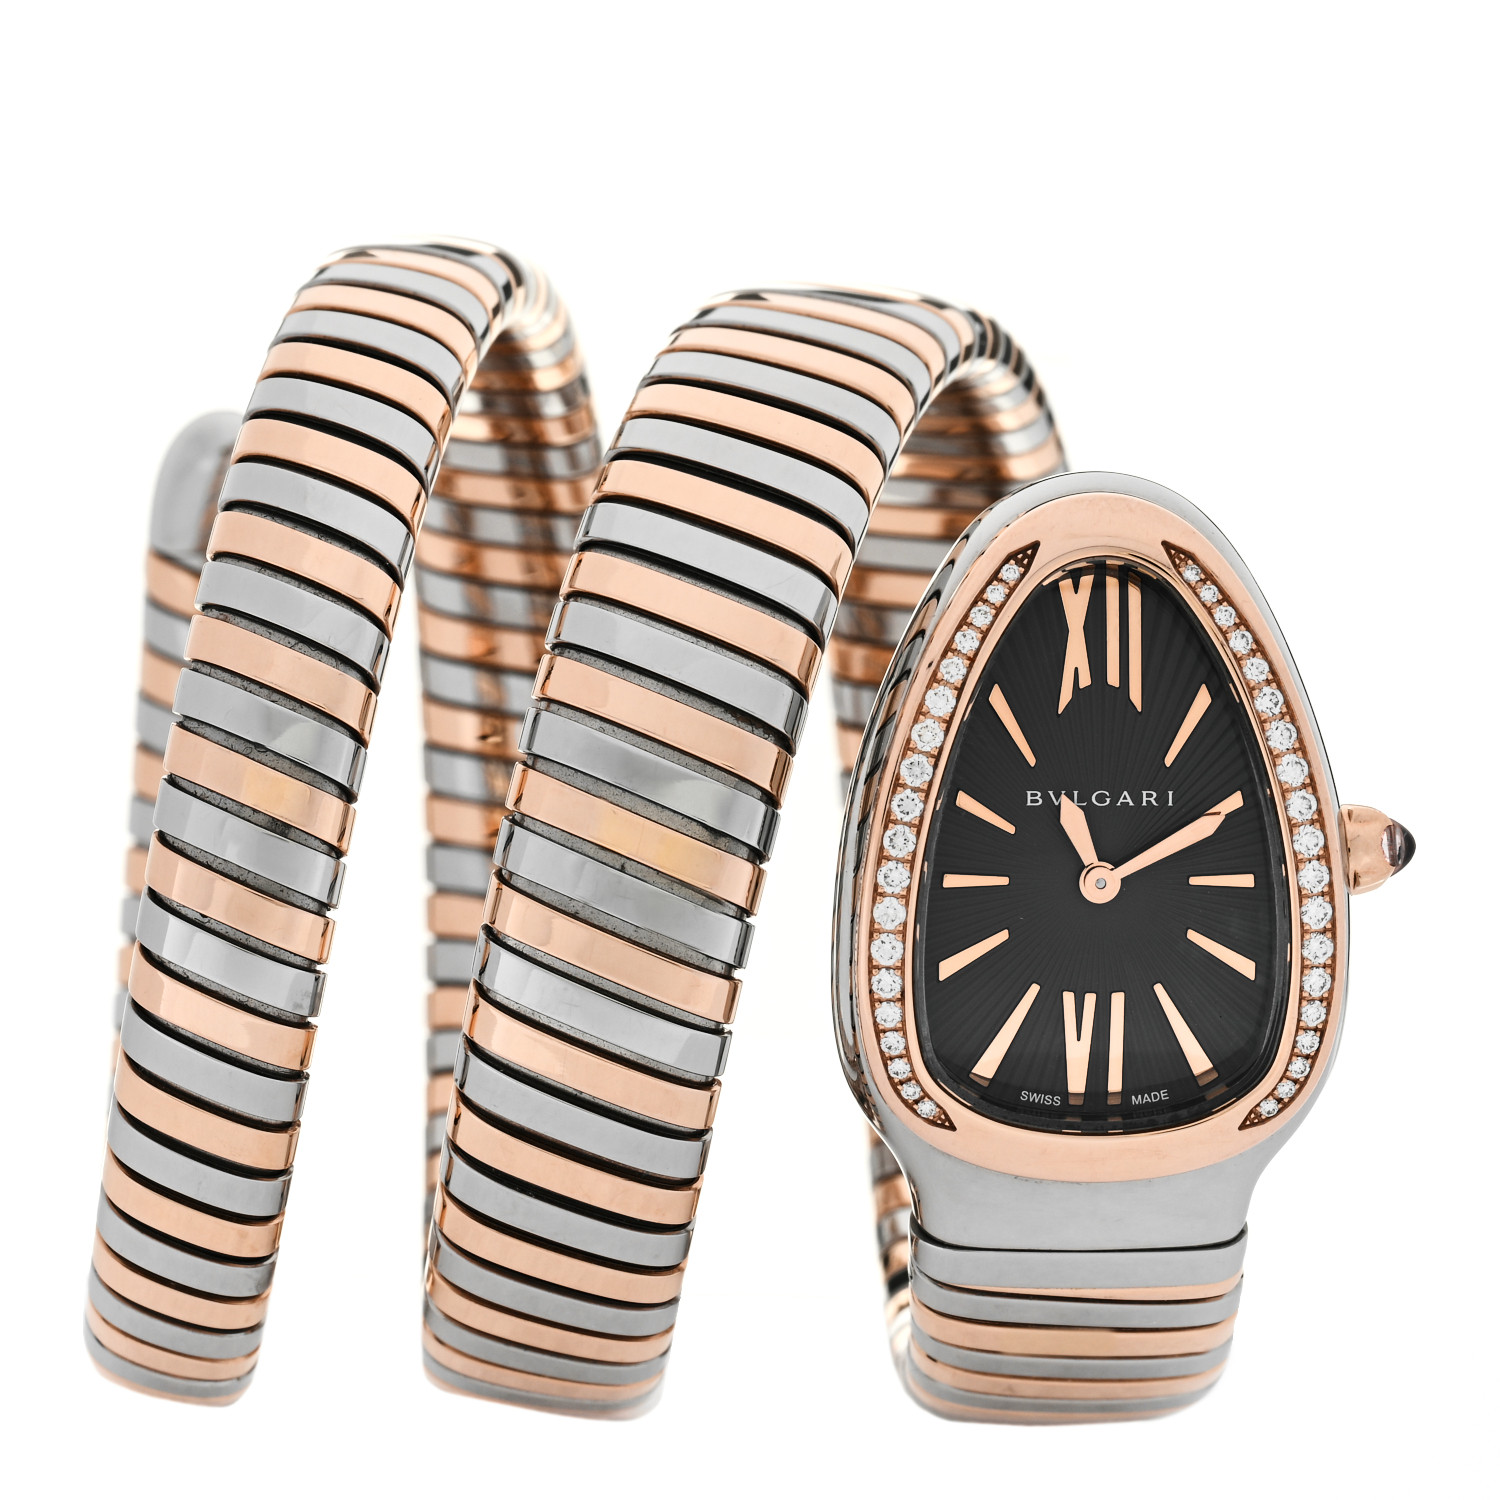 BULGARI Stainless Steel 18K Rose Gold Diamond Bezel 35mm Serpenti Tubogas Double Spiral Quartz Watch with a Black dial by FASHIONPHILE